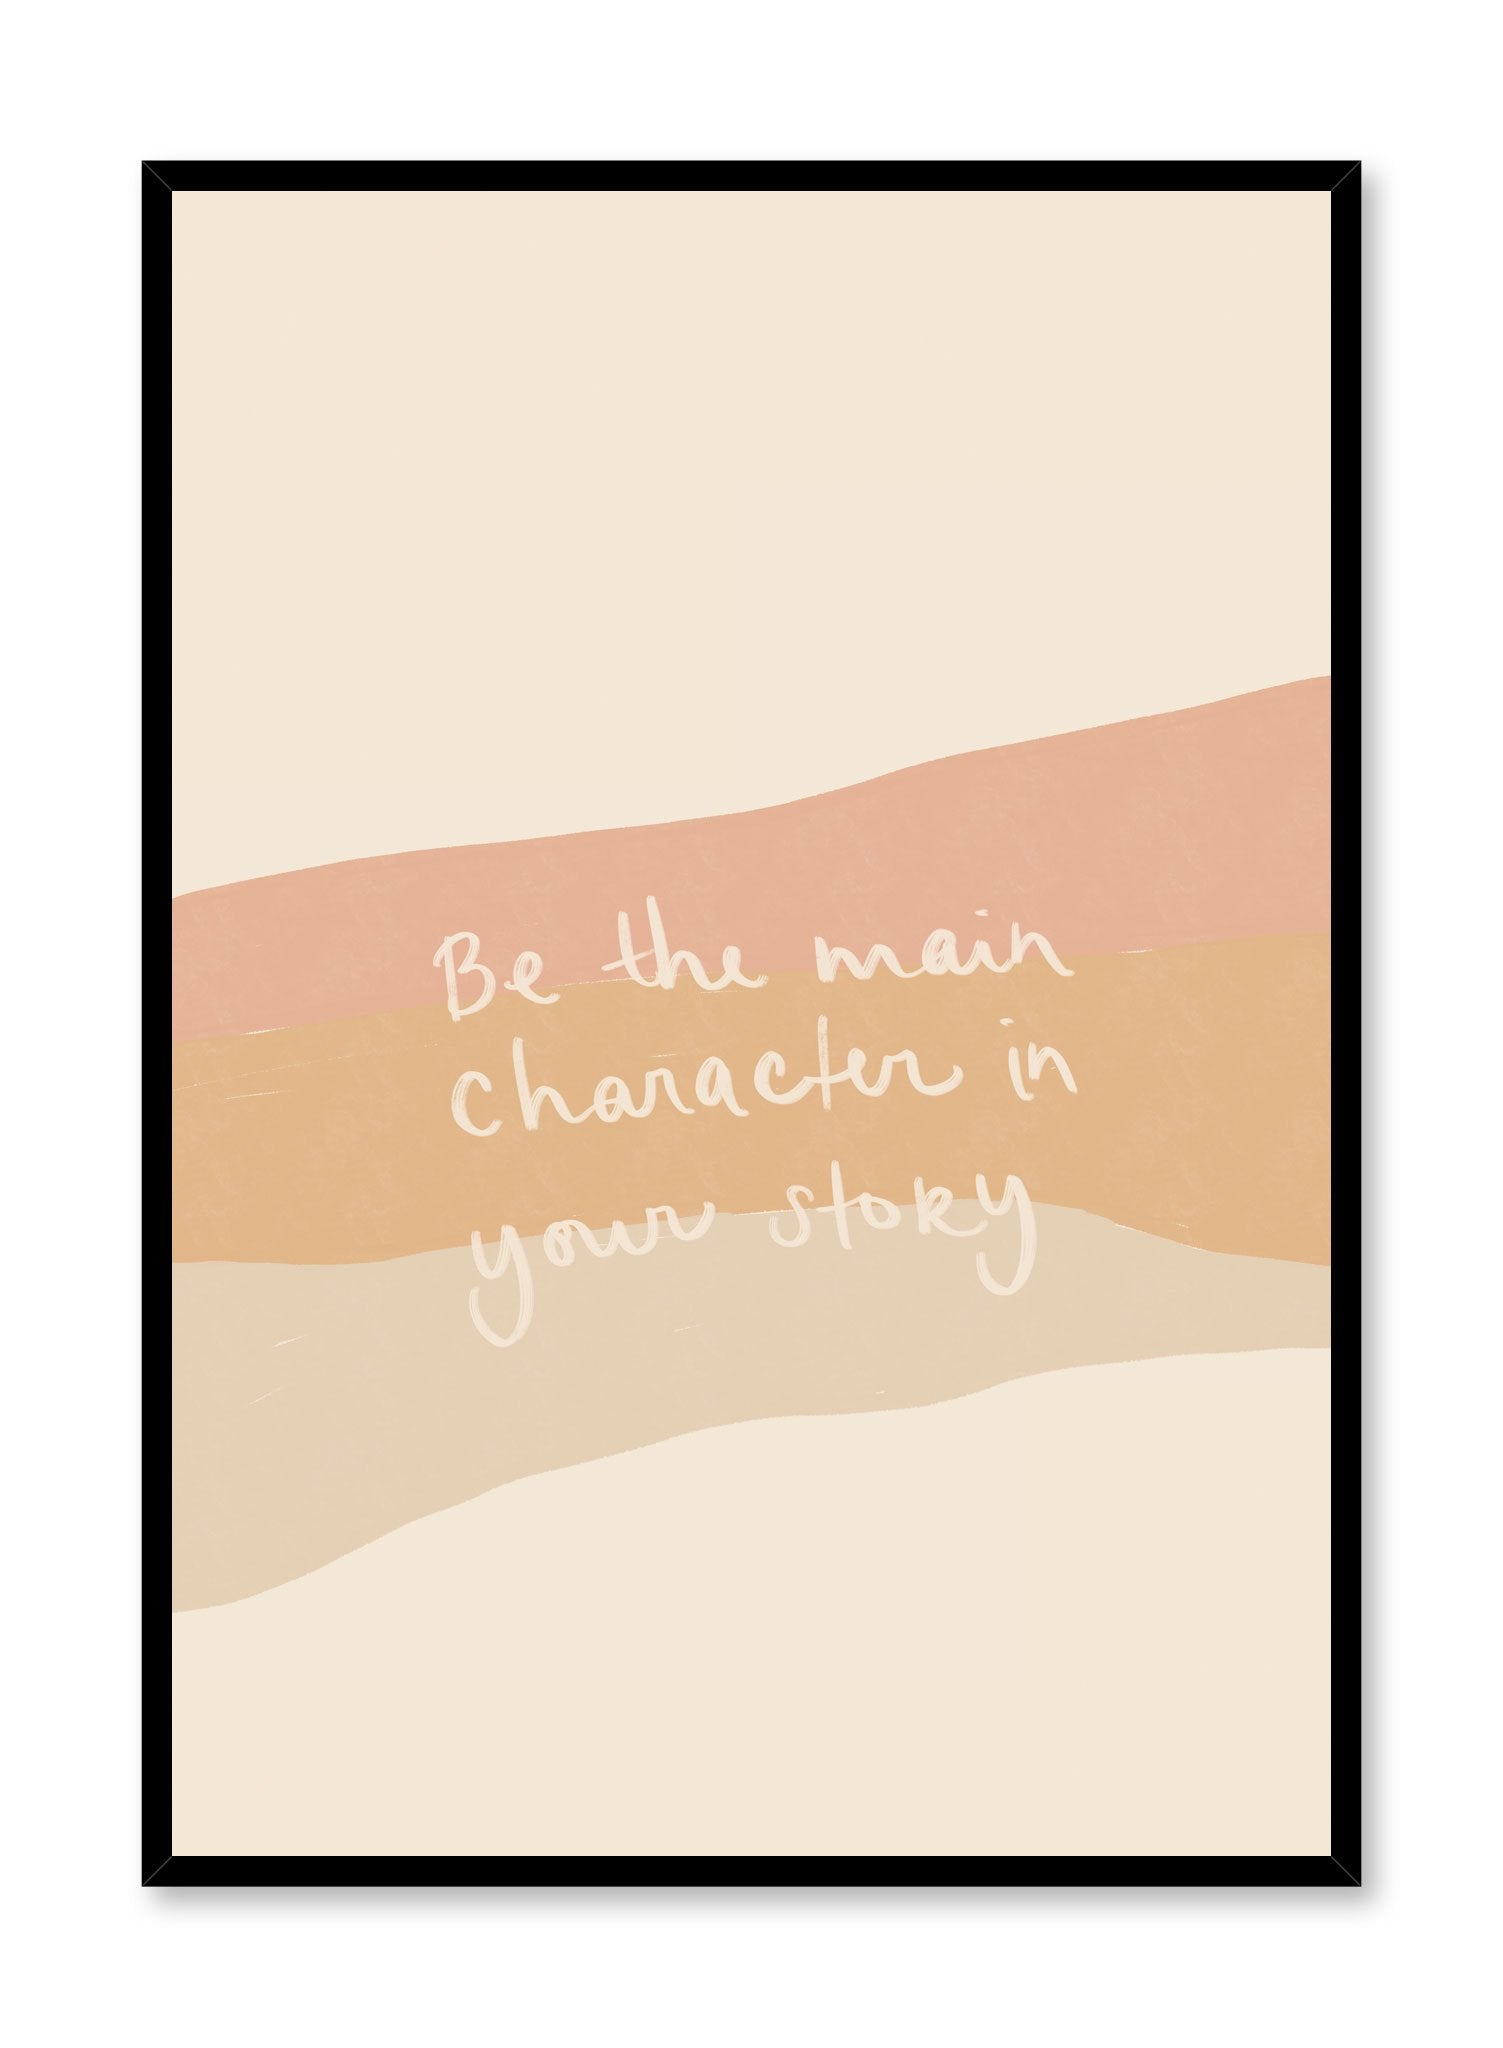 Main Character is a minimalist typography by Opposite Wall of the message "Be the main character in your story" layered over strokes of pink and orange hues. 